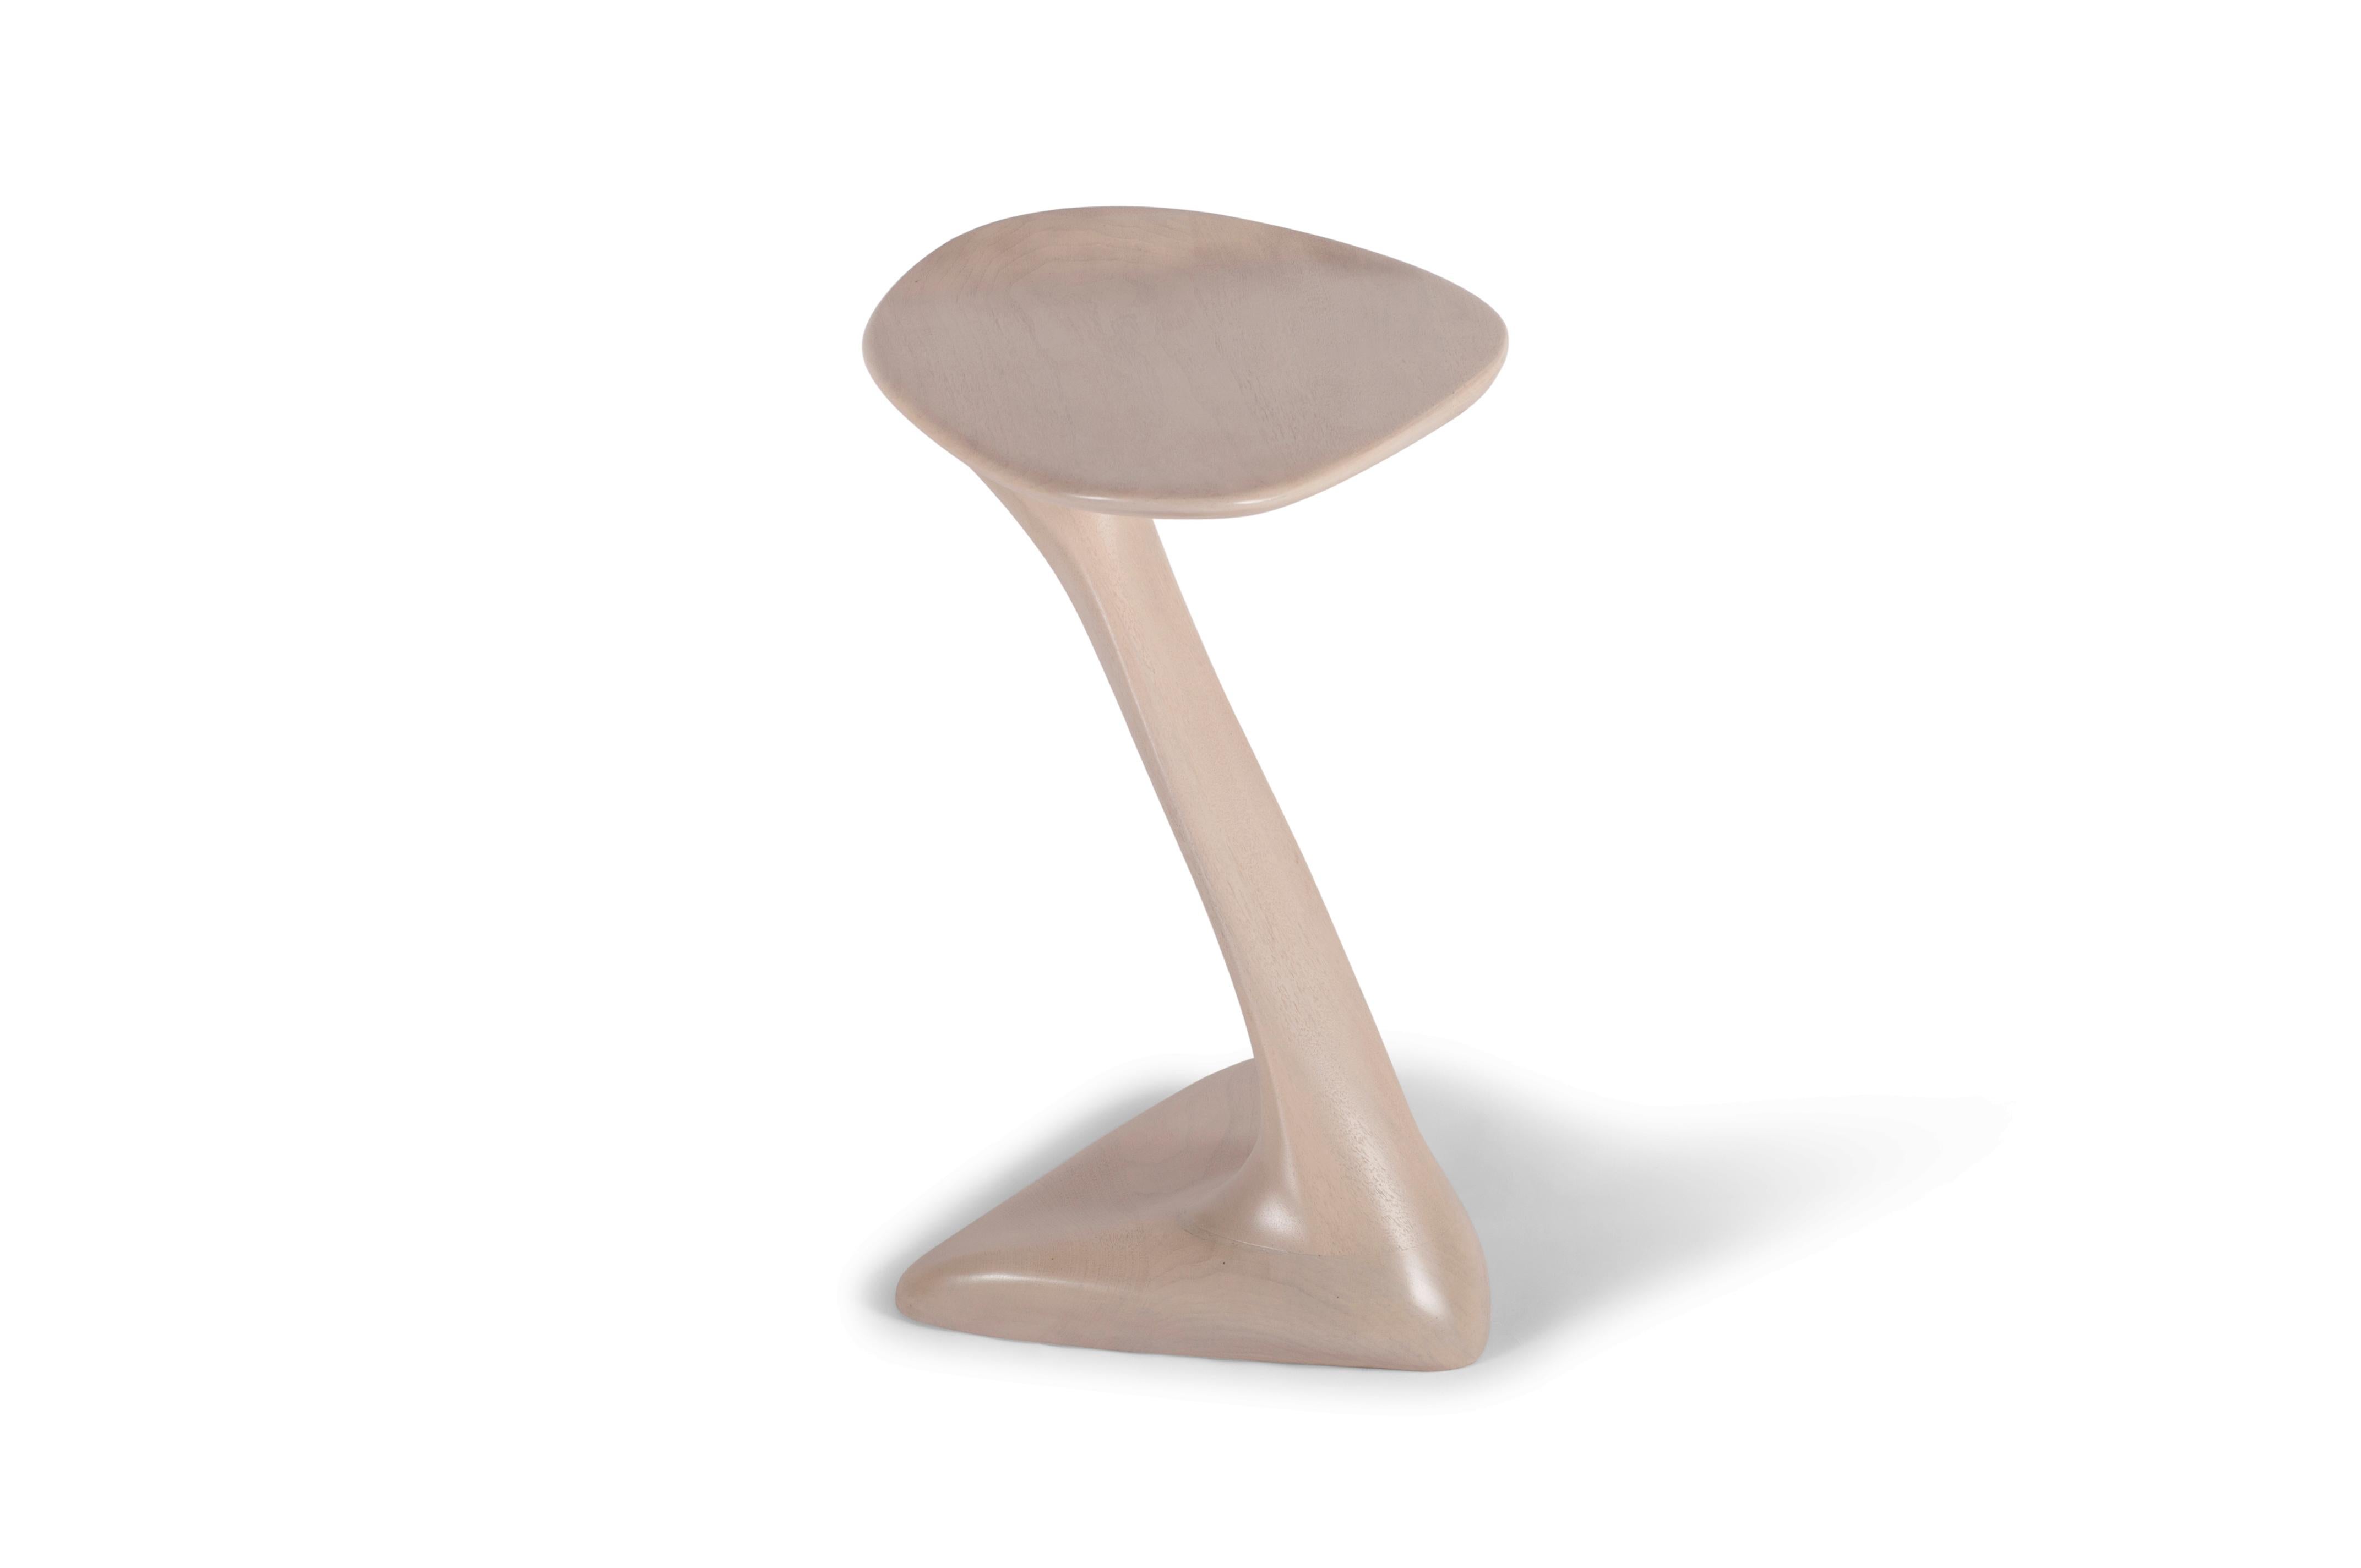 sculptural side table with unique and dynamic shaped designed and manufactured by Amorph. 
Snow stain on Walnut wood
Dimension: 19.25